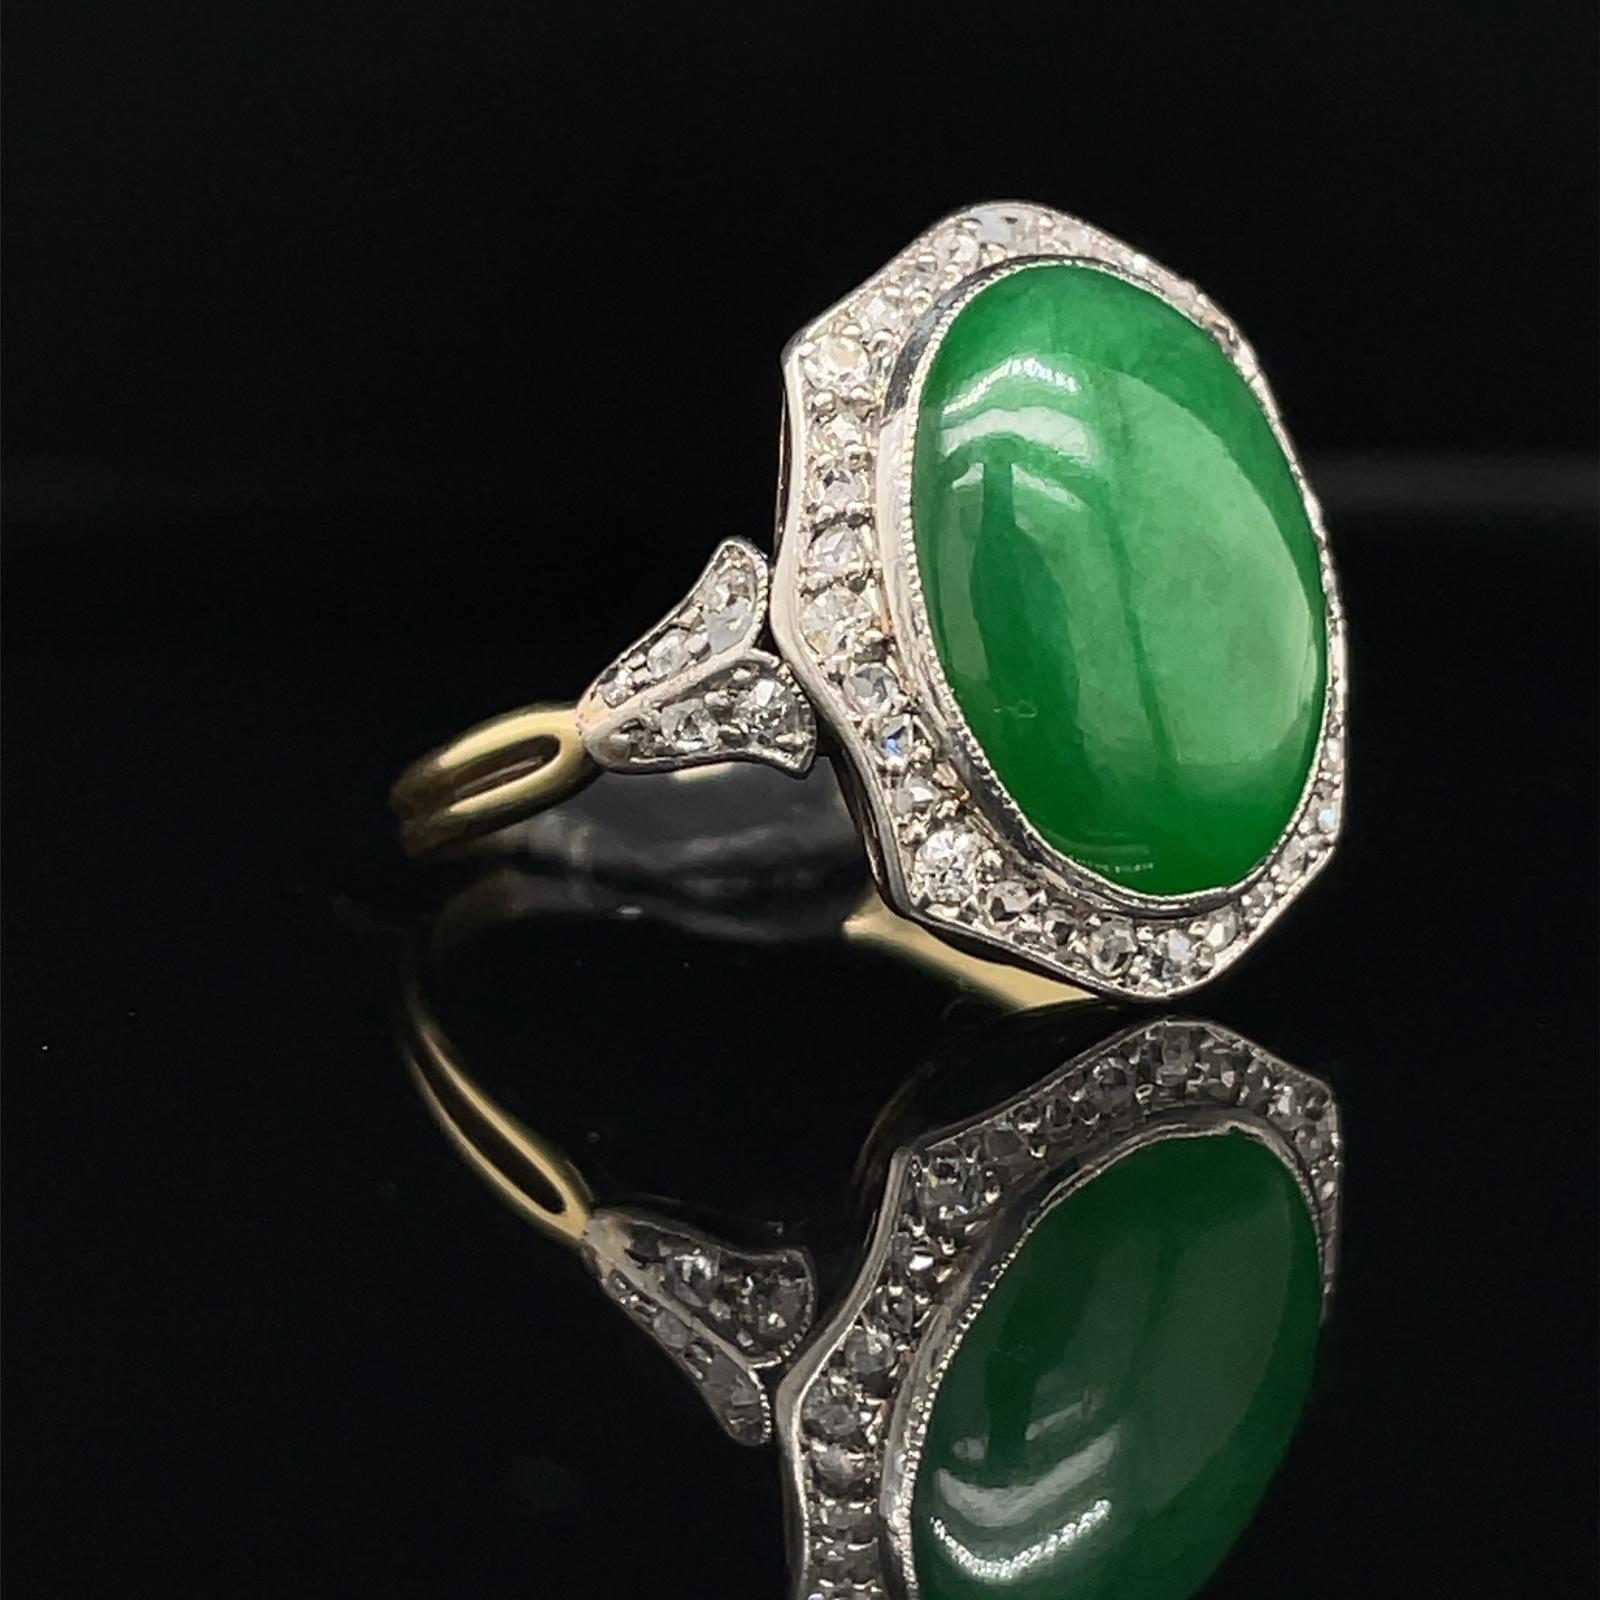 A vintage jade and diamond engagement ring in 18 karat yellow gold, circa 1940.

This ring features a central oval cabochon of 'imperial green coloured' jadeite, estimated as 4.40 carats bezel set in platinum within a delicate and light cluster of